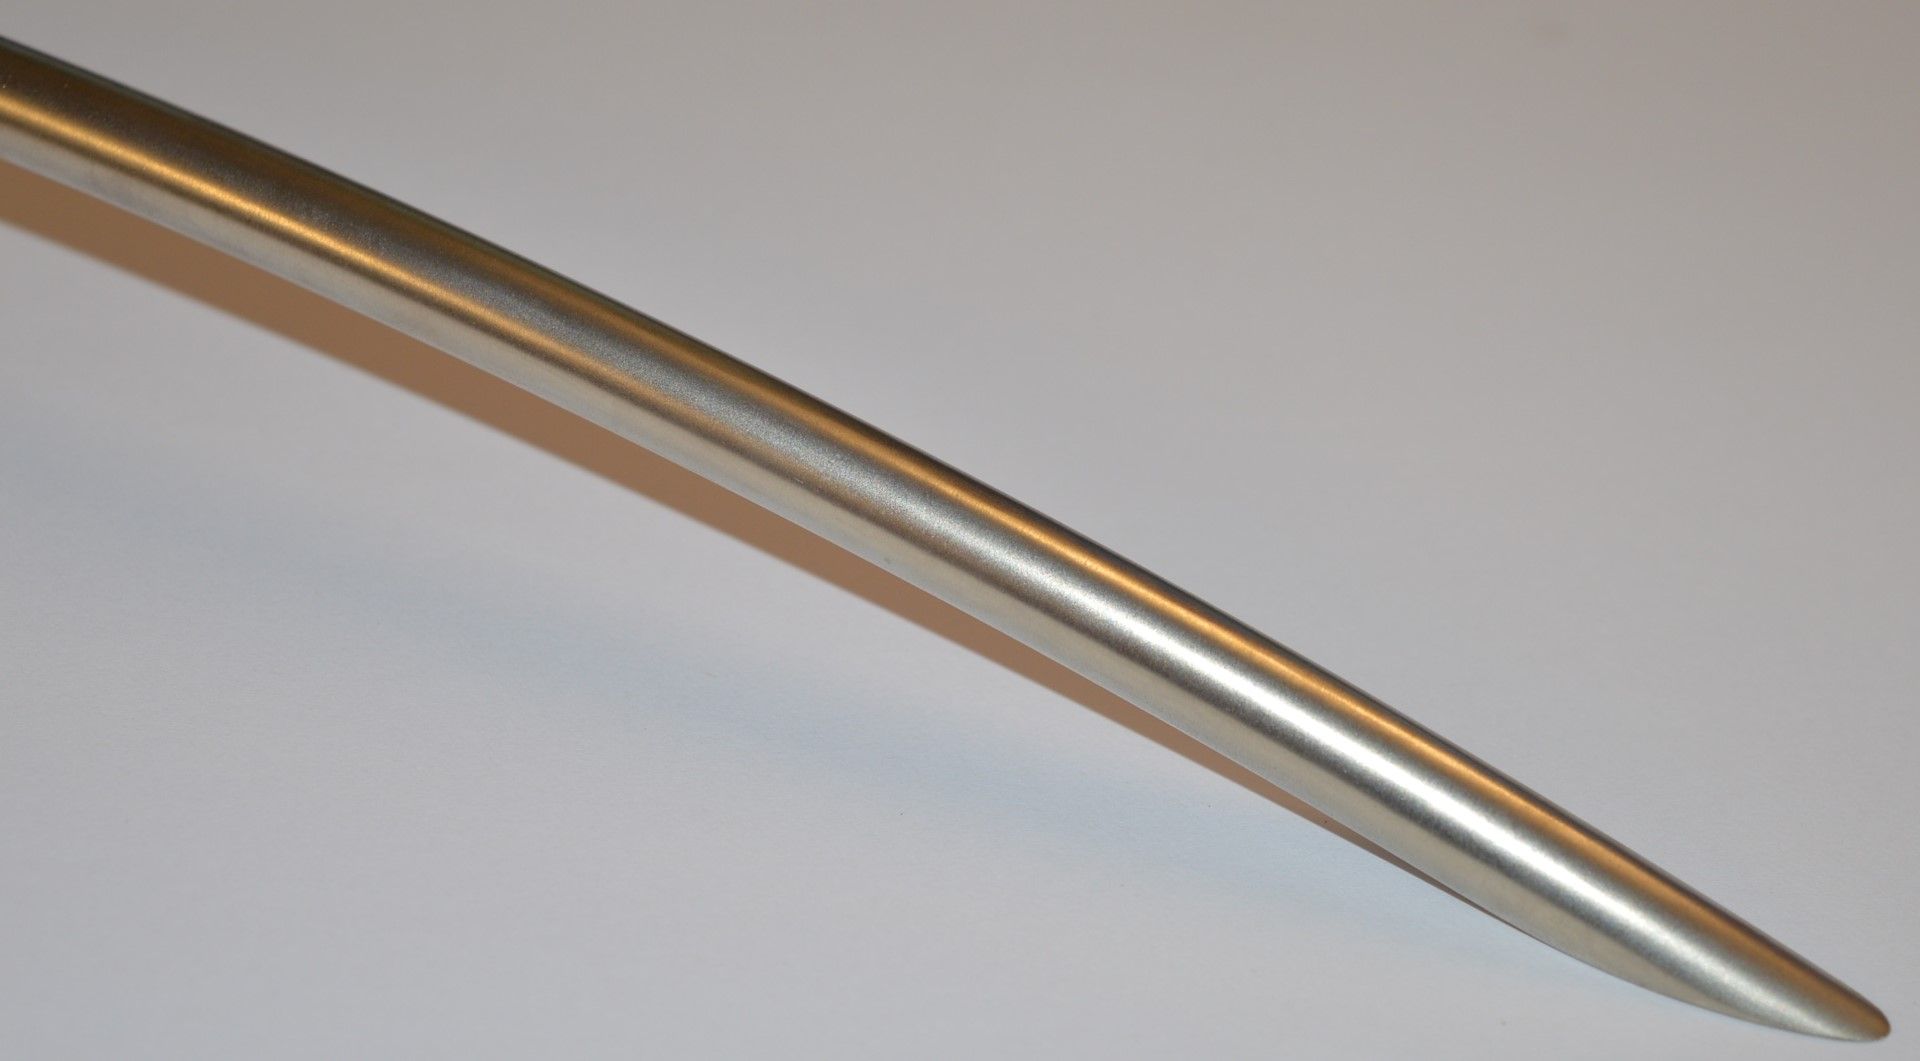 200 x Contemporary Cabinet Door Handles - Stunning Brushed Nickel Finish With Bow Design - CL003 - - Image 3 of 6